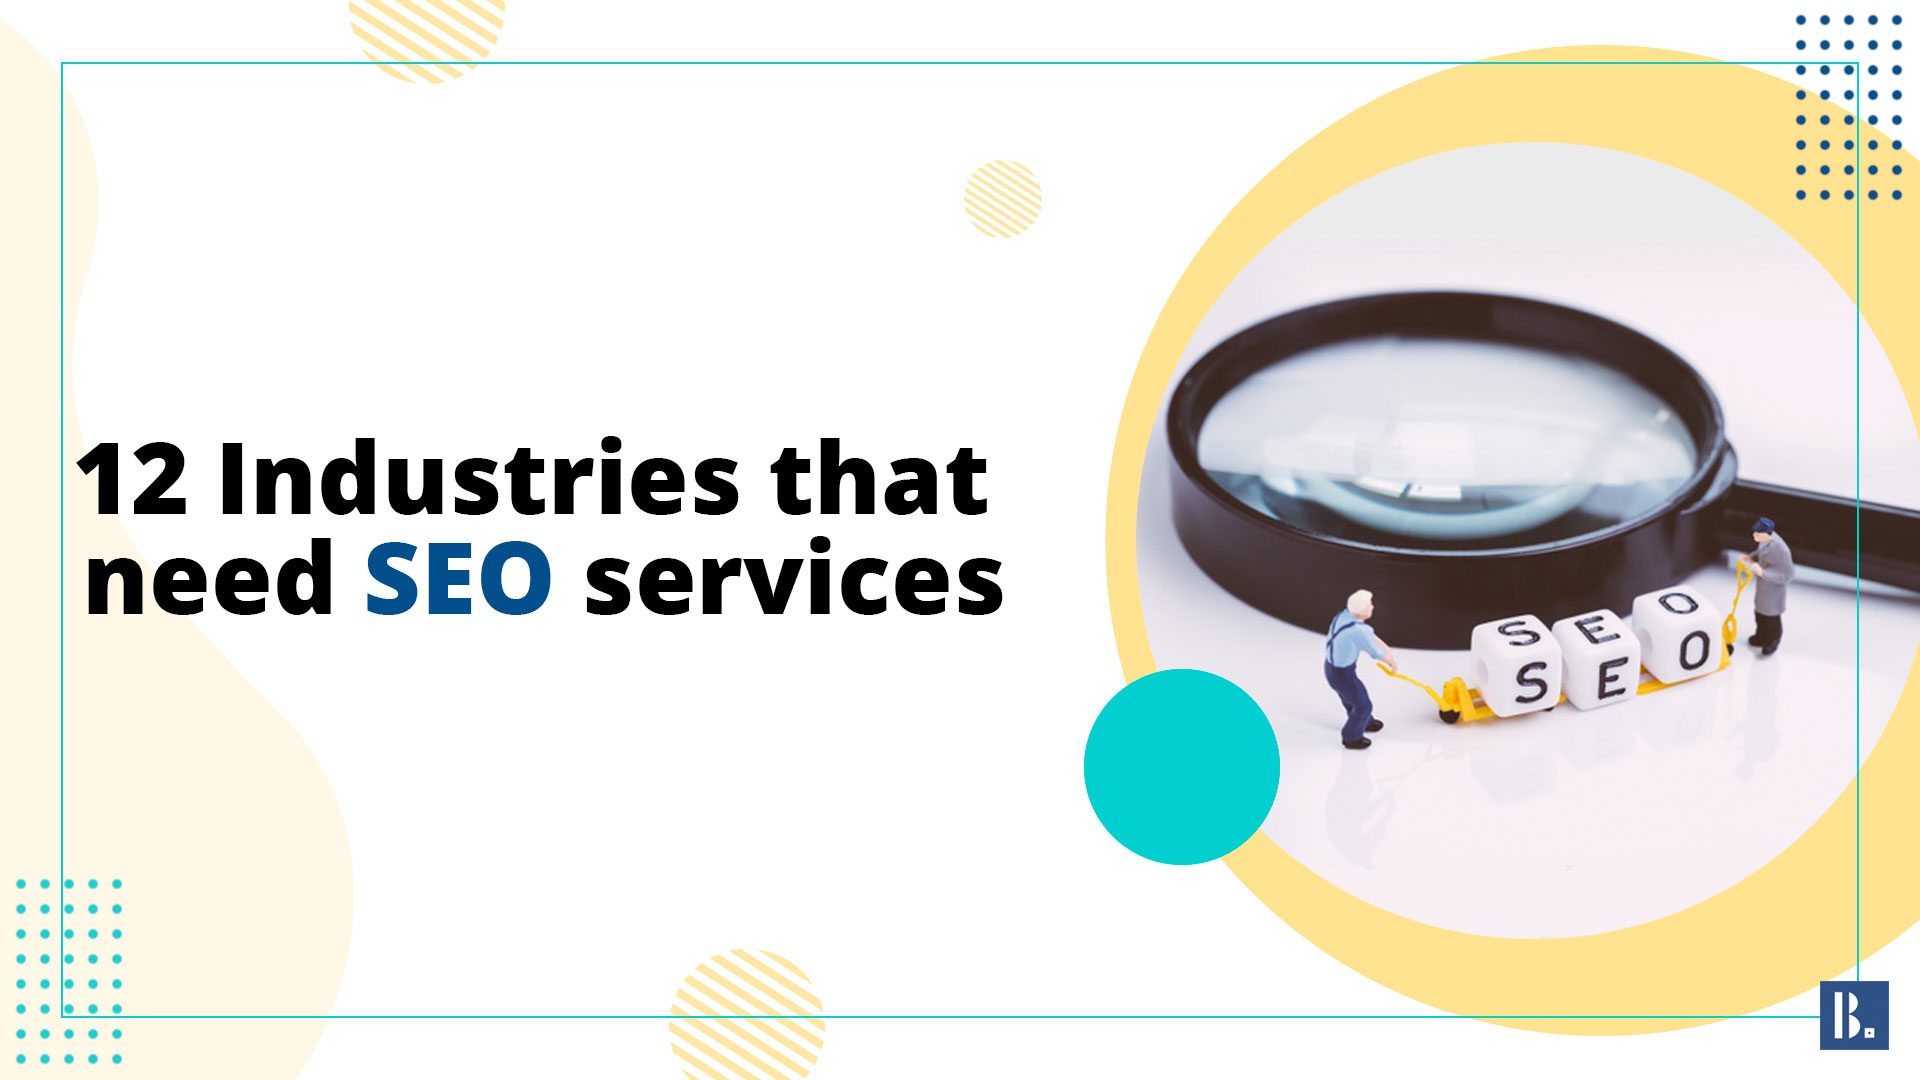 You are currently viewing 12 Industries that need SEO services